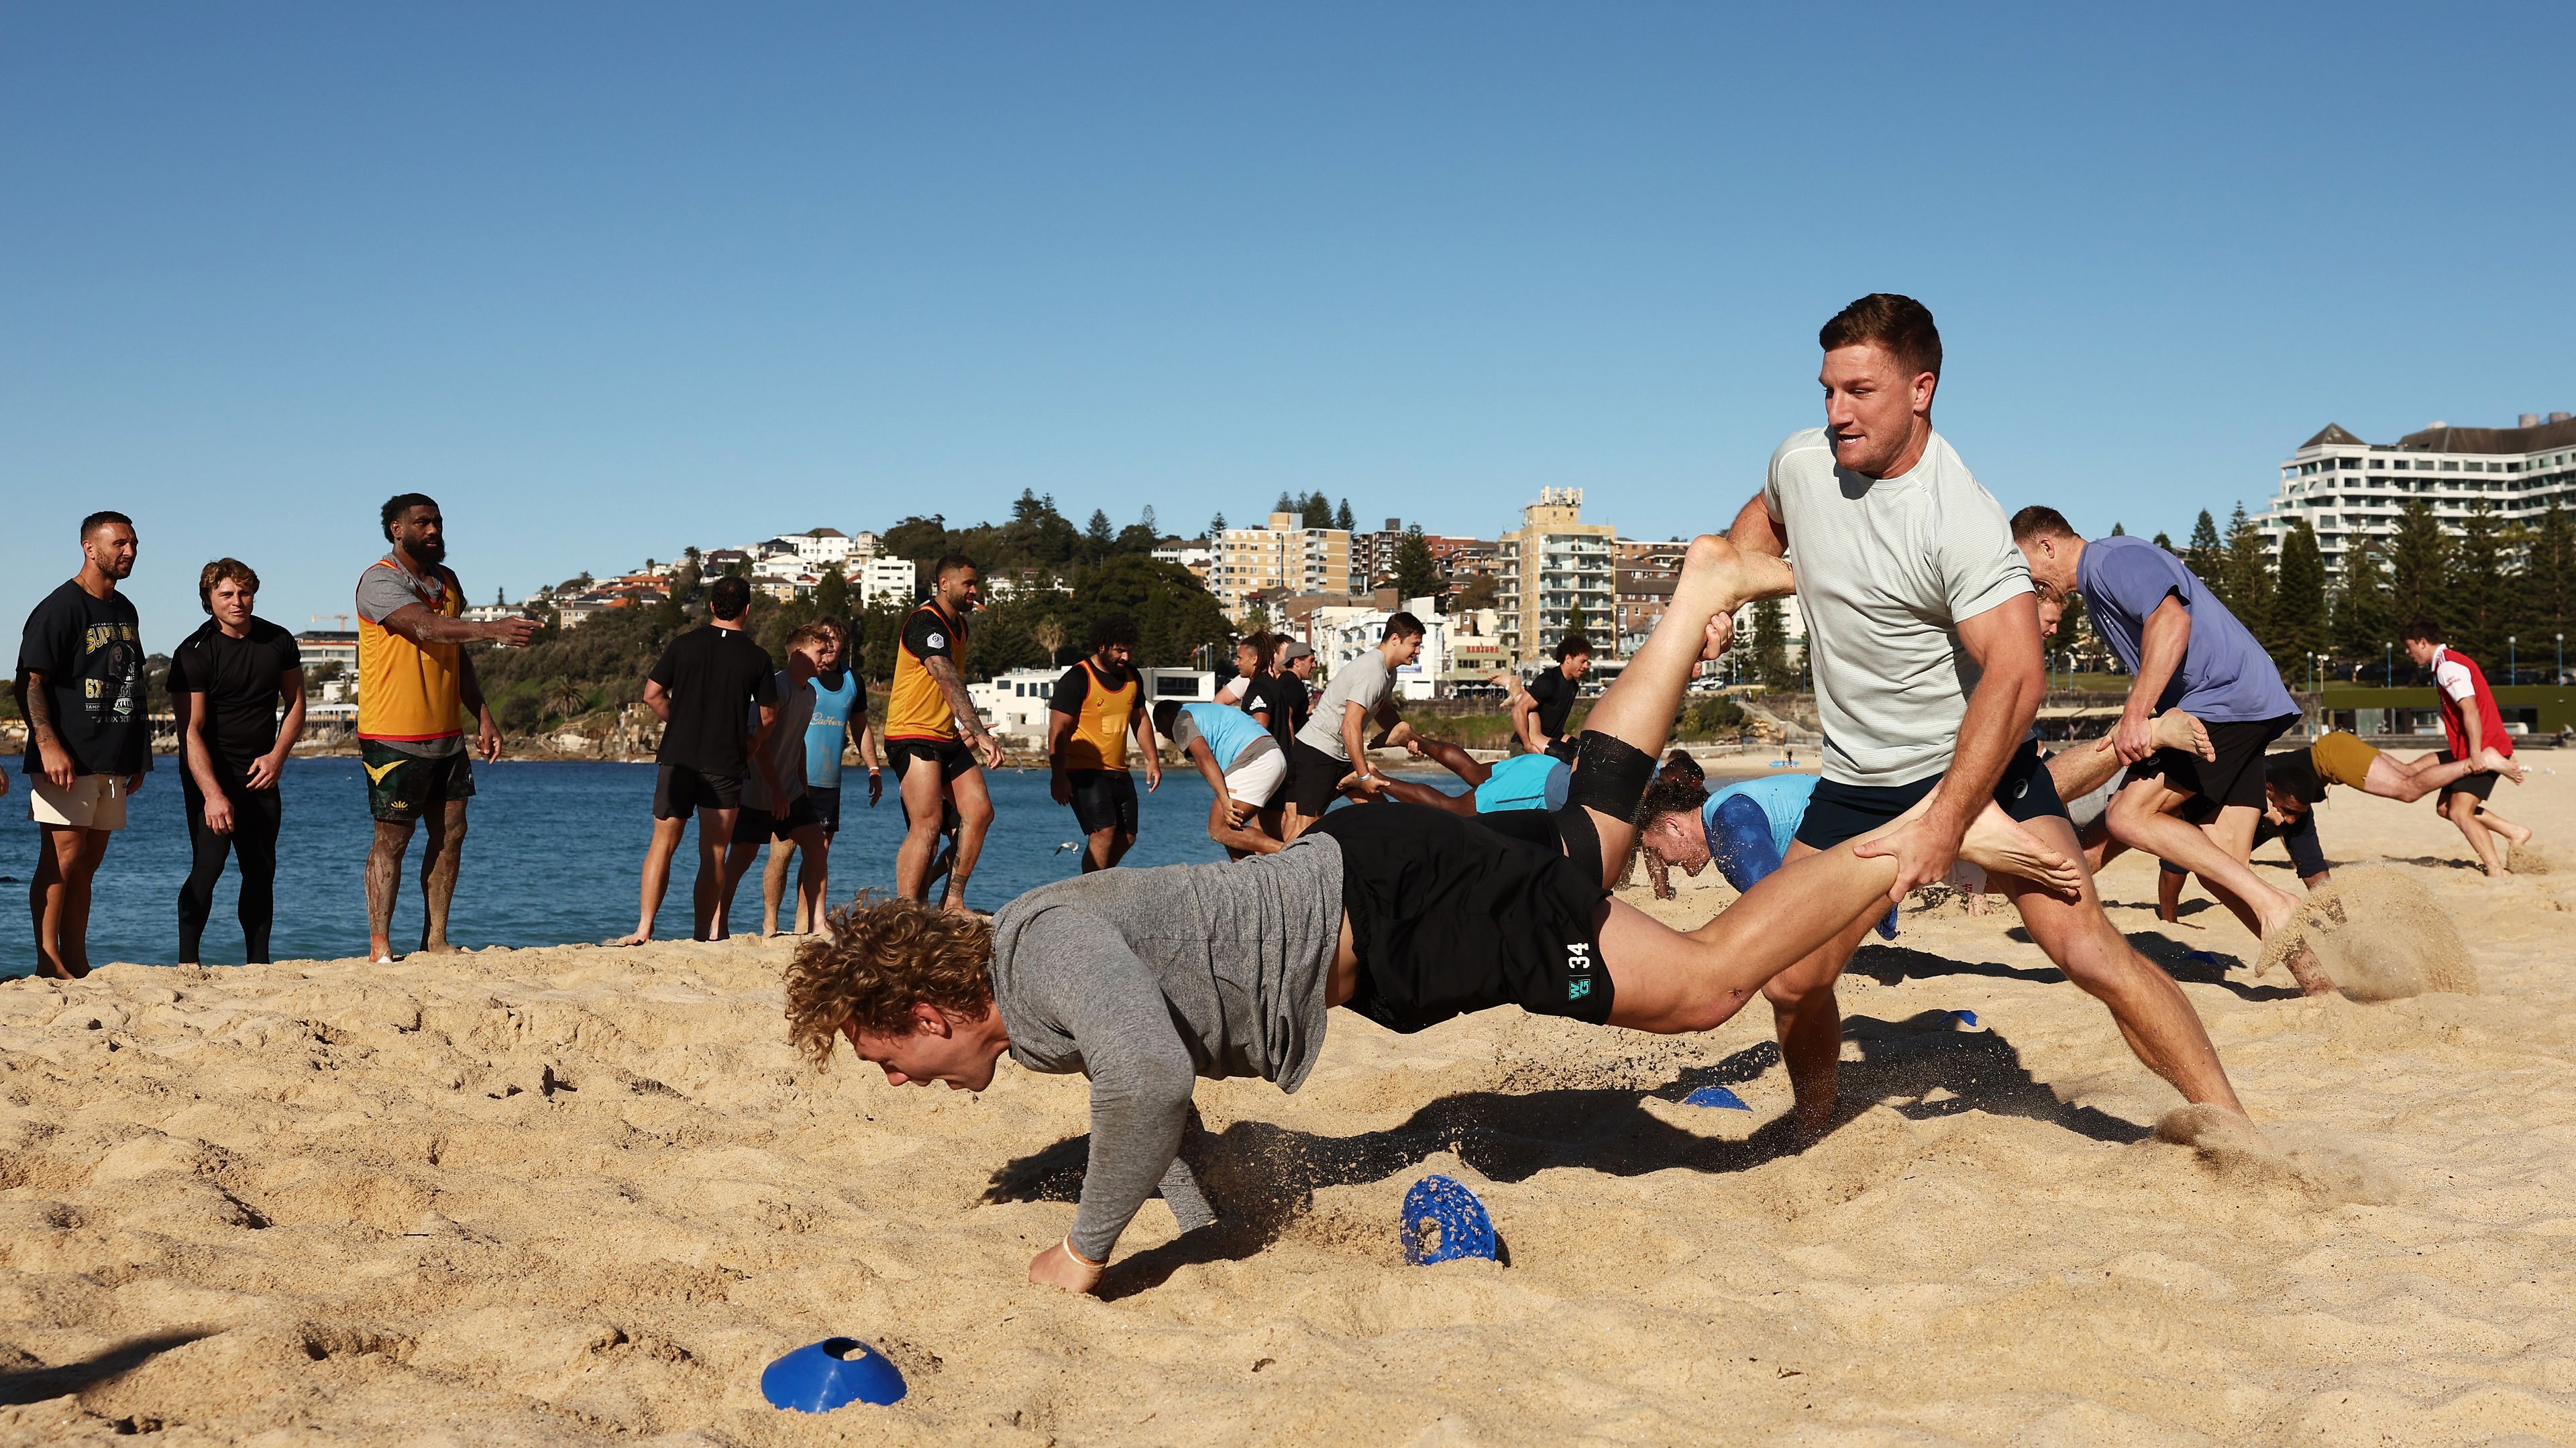 James Tuttle and Ned Hanigan take part in a drill during Wallabies training at Coogee Beach.